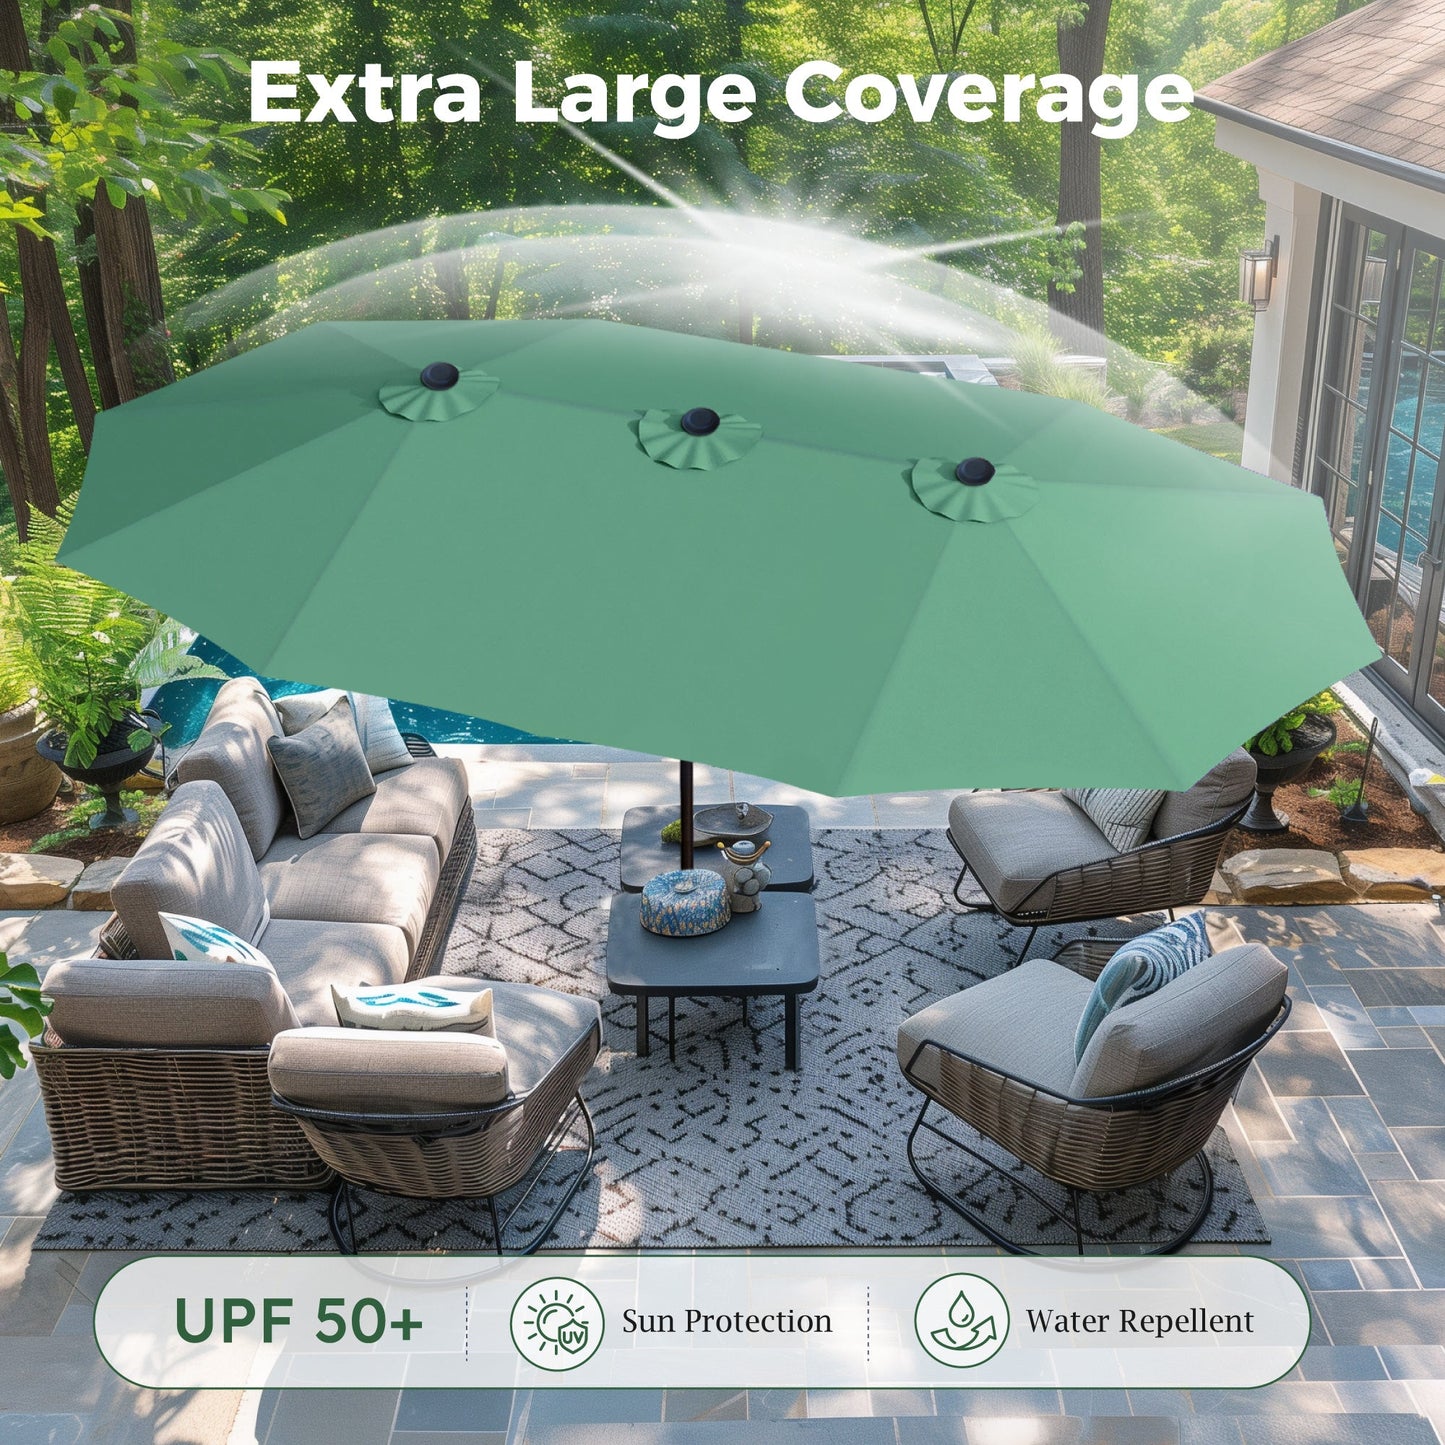 Alpha Joy 15ft Outdoor Patio Umbrella Extra-Large Double-Sided Garden Umbrella with Crank Handle and Base - Mint Green